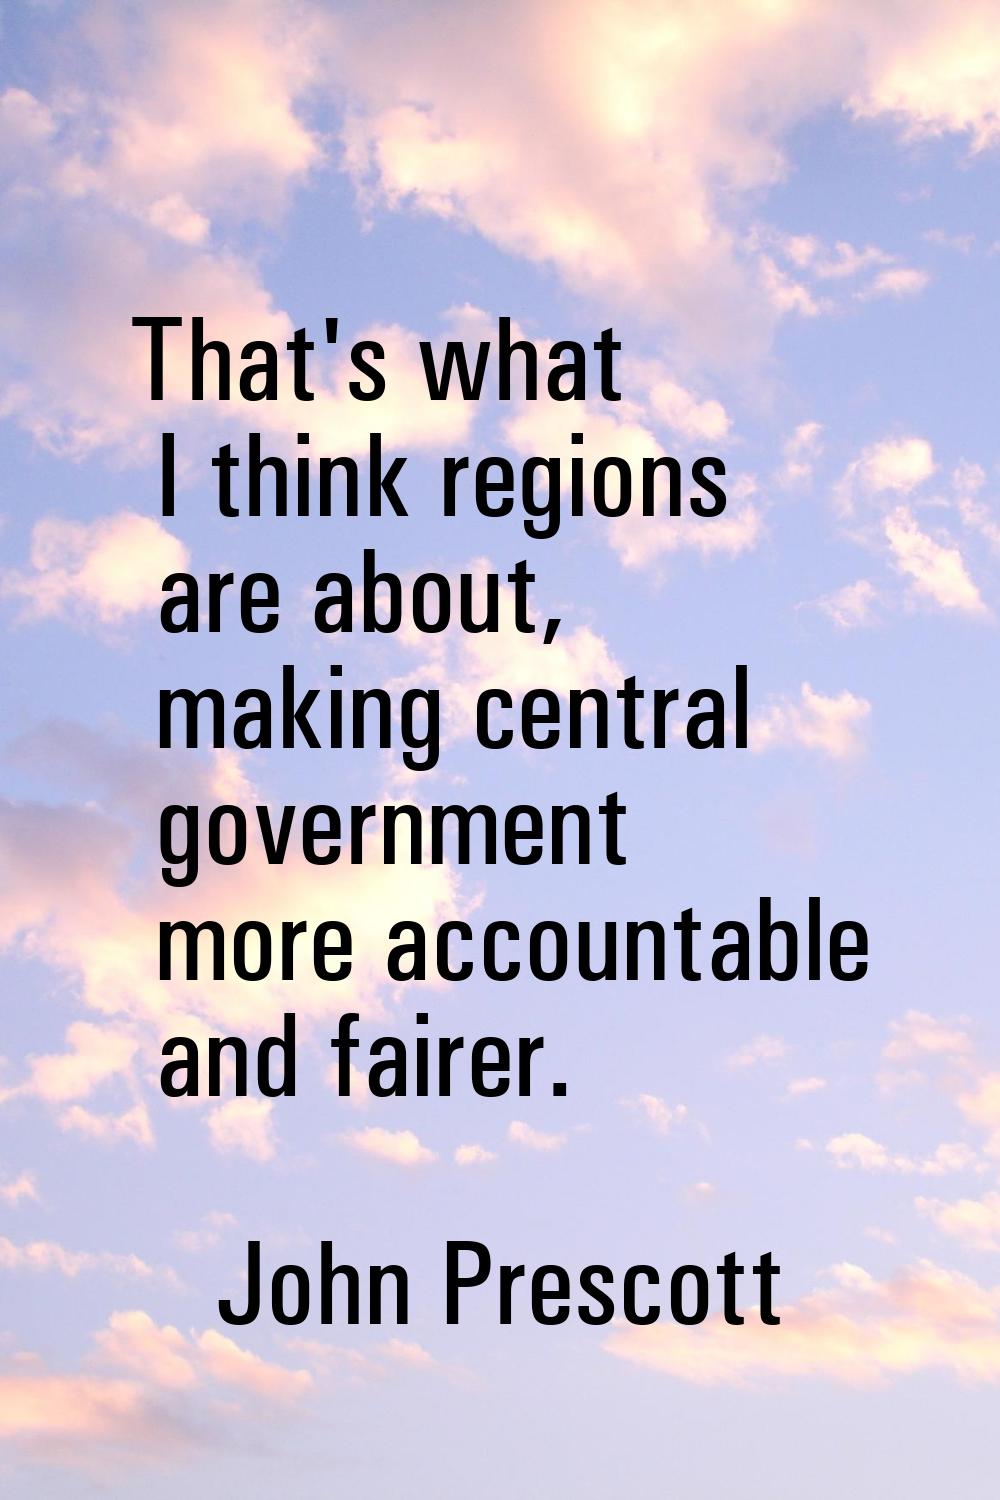 That's what I think regions are about, making central government more accountable and fairer.